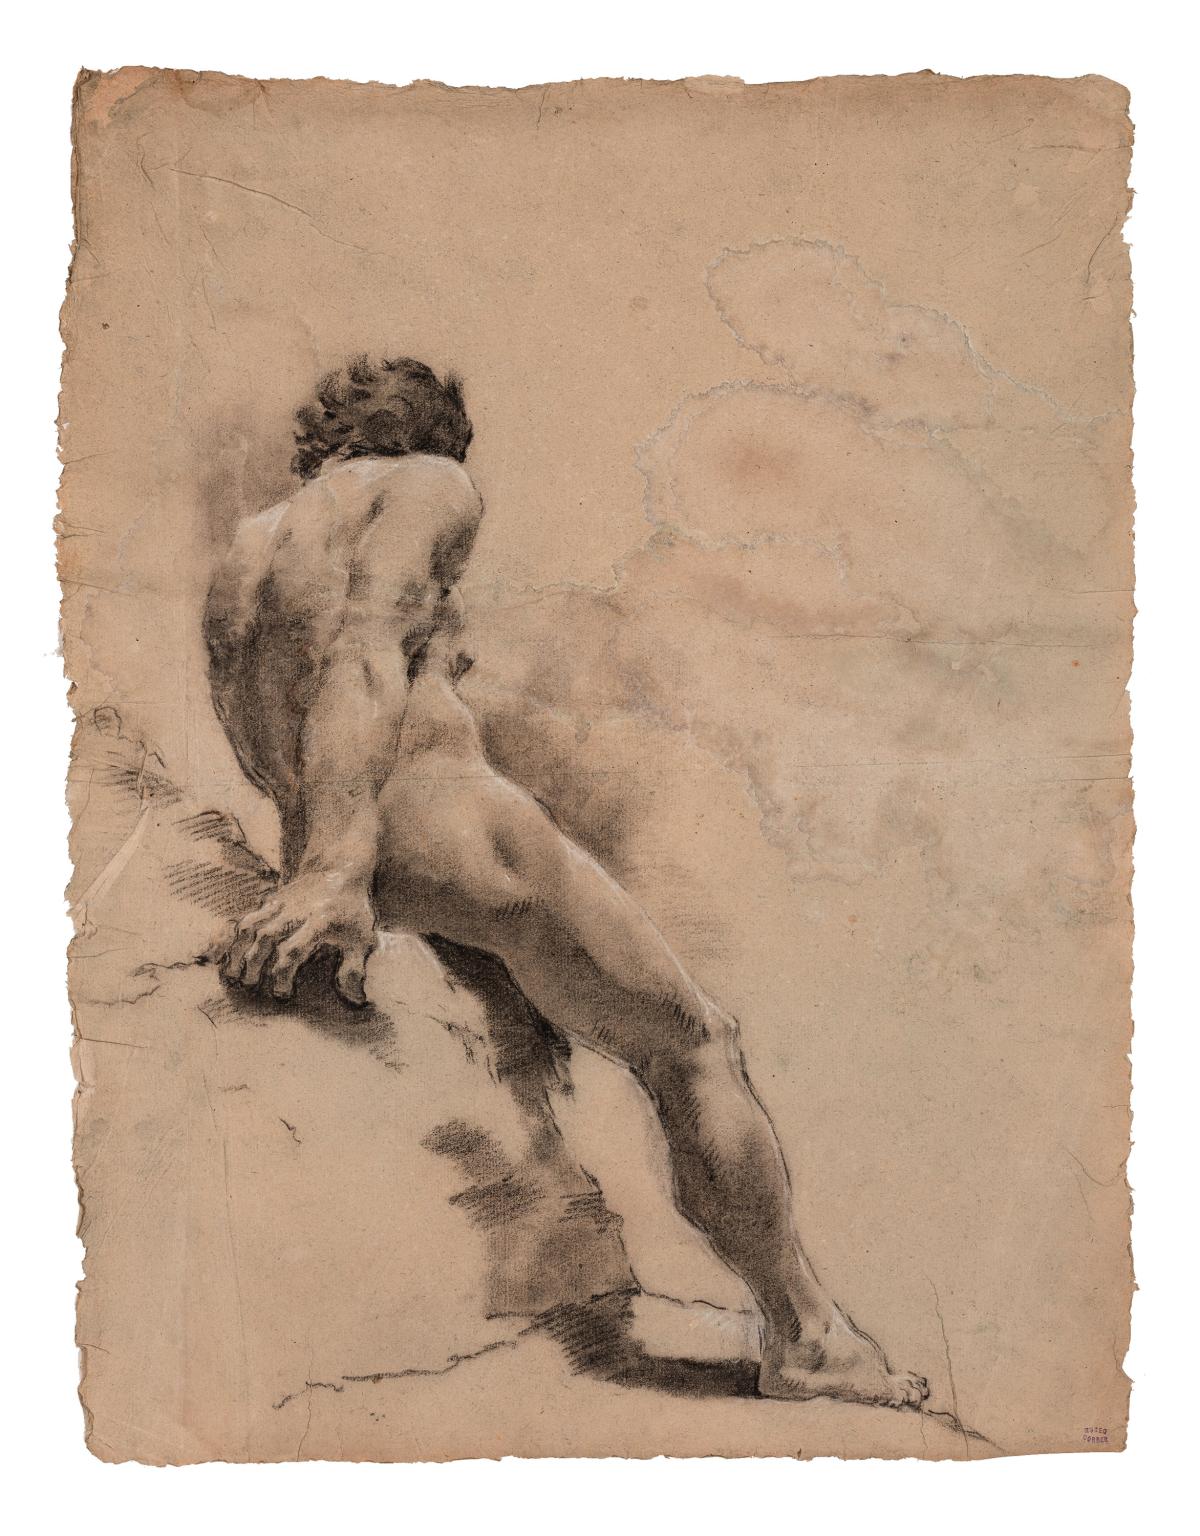 Male nude, shown from behind, leaning on a rock